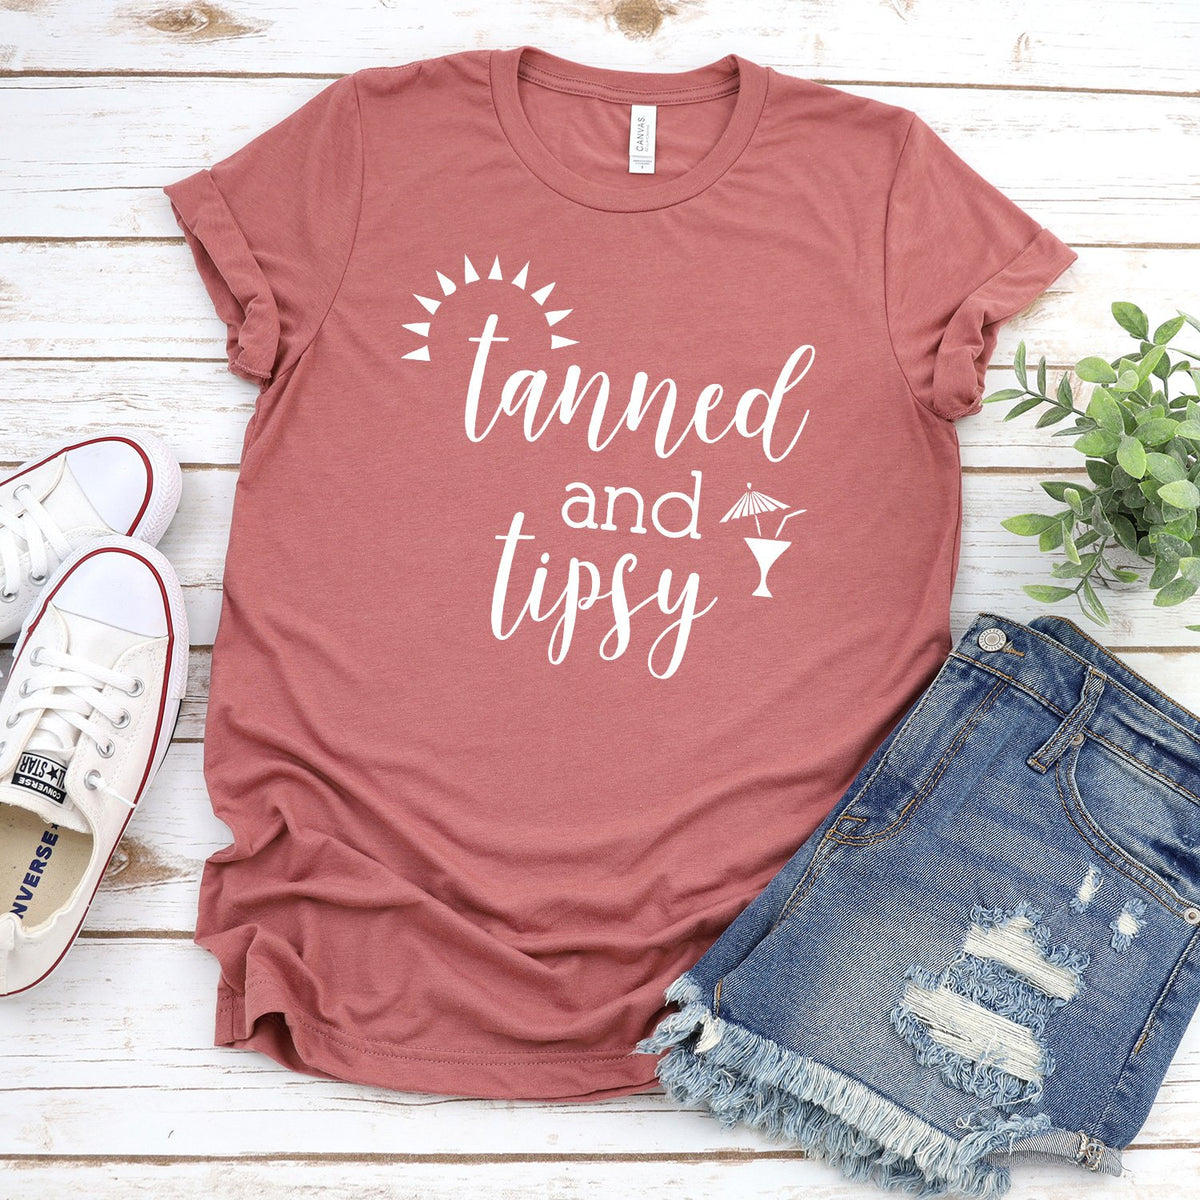 Tanned and Tipsy - Short Sleeve Tee Shirt